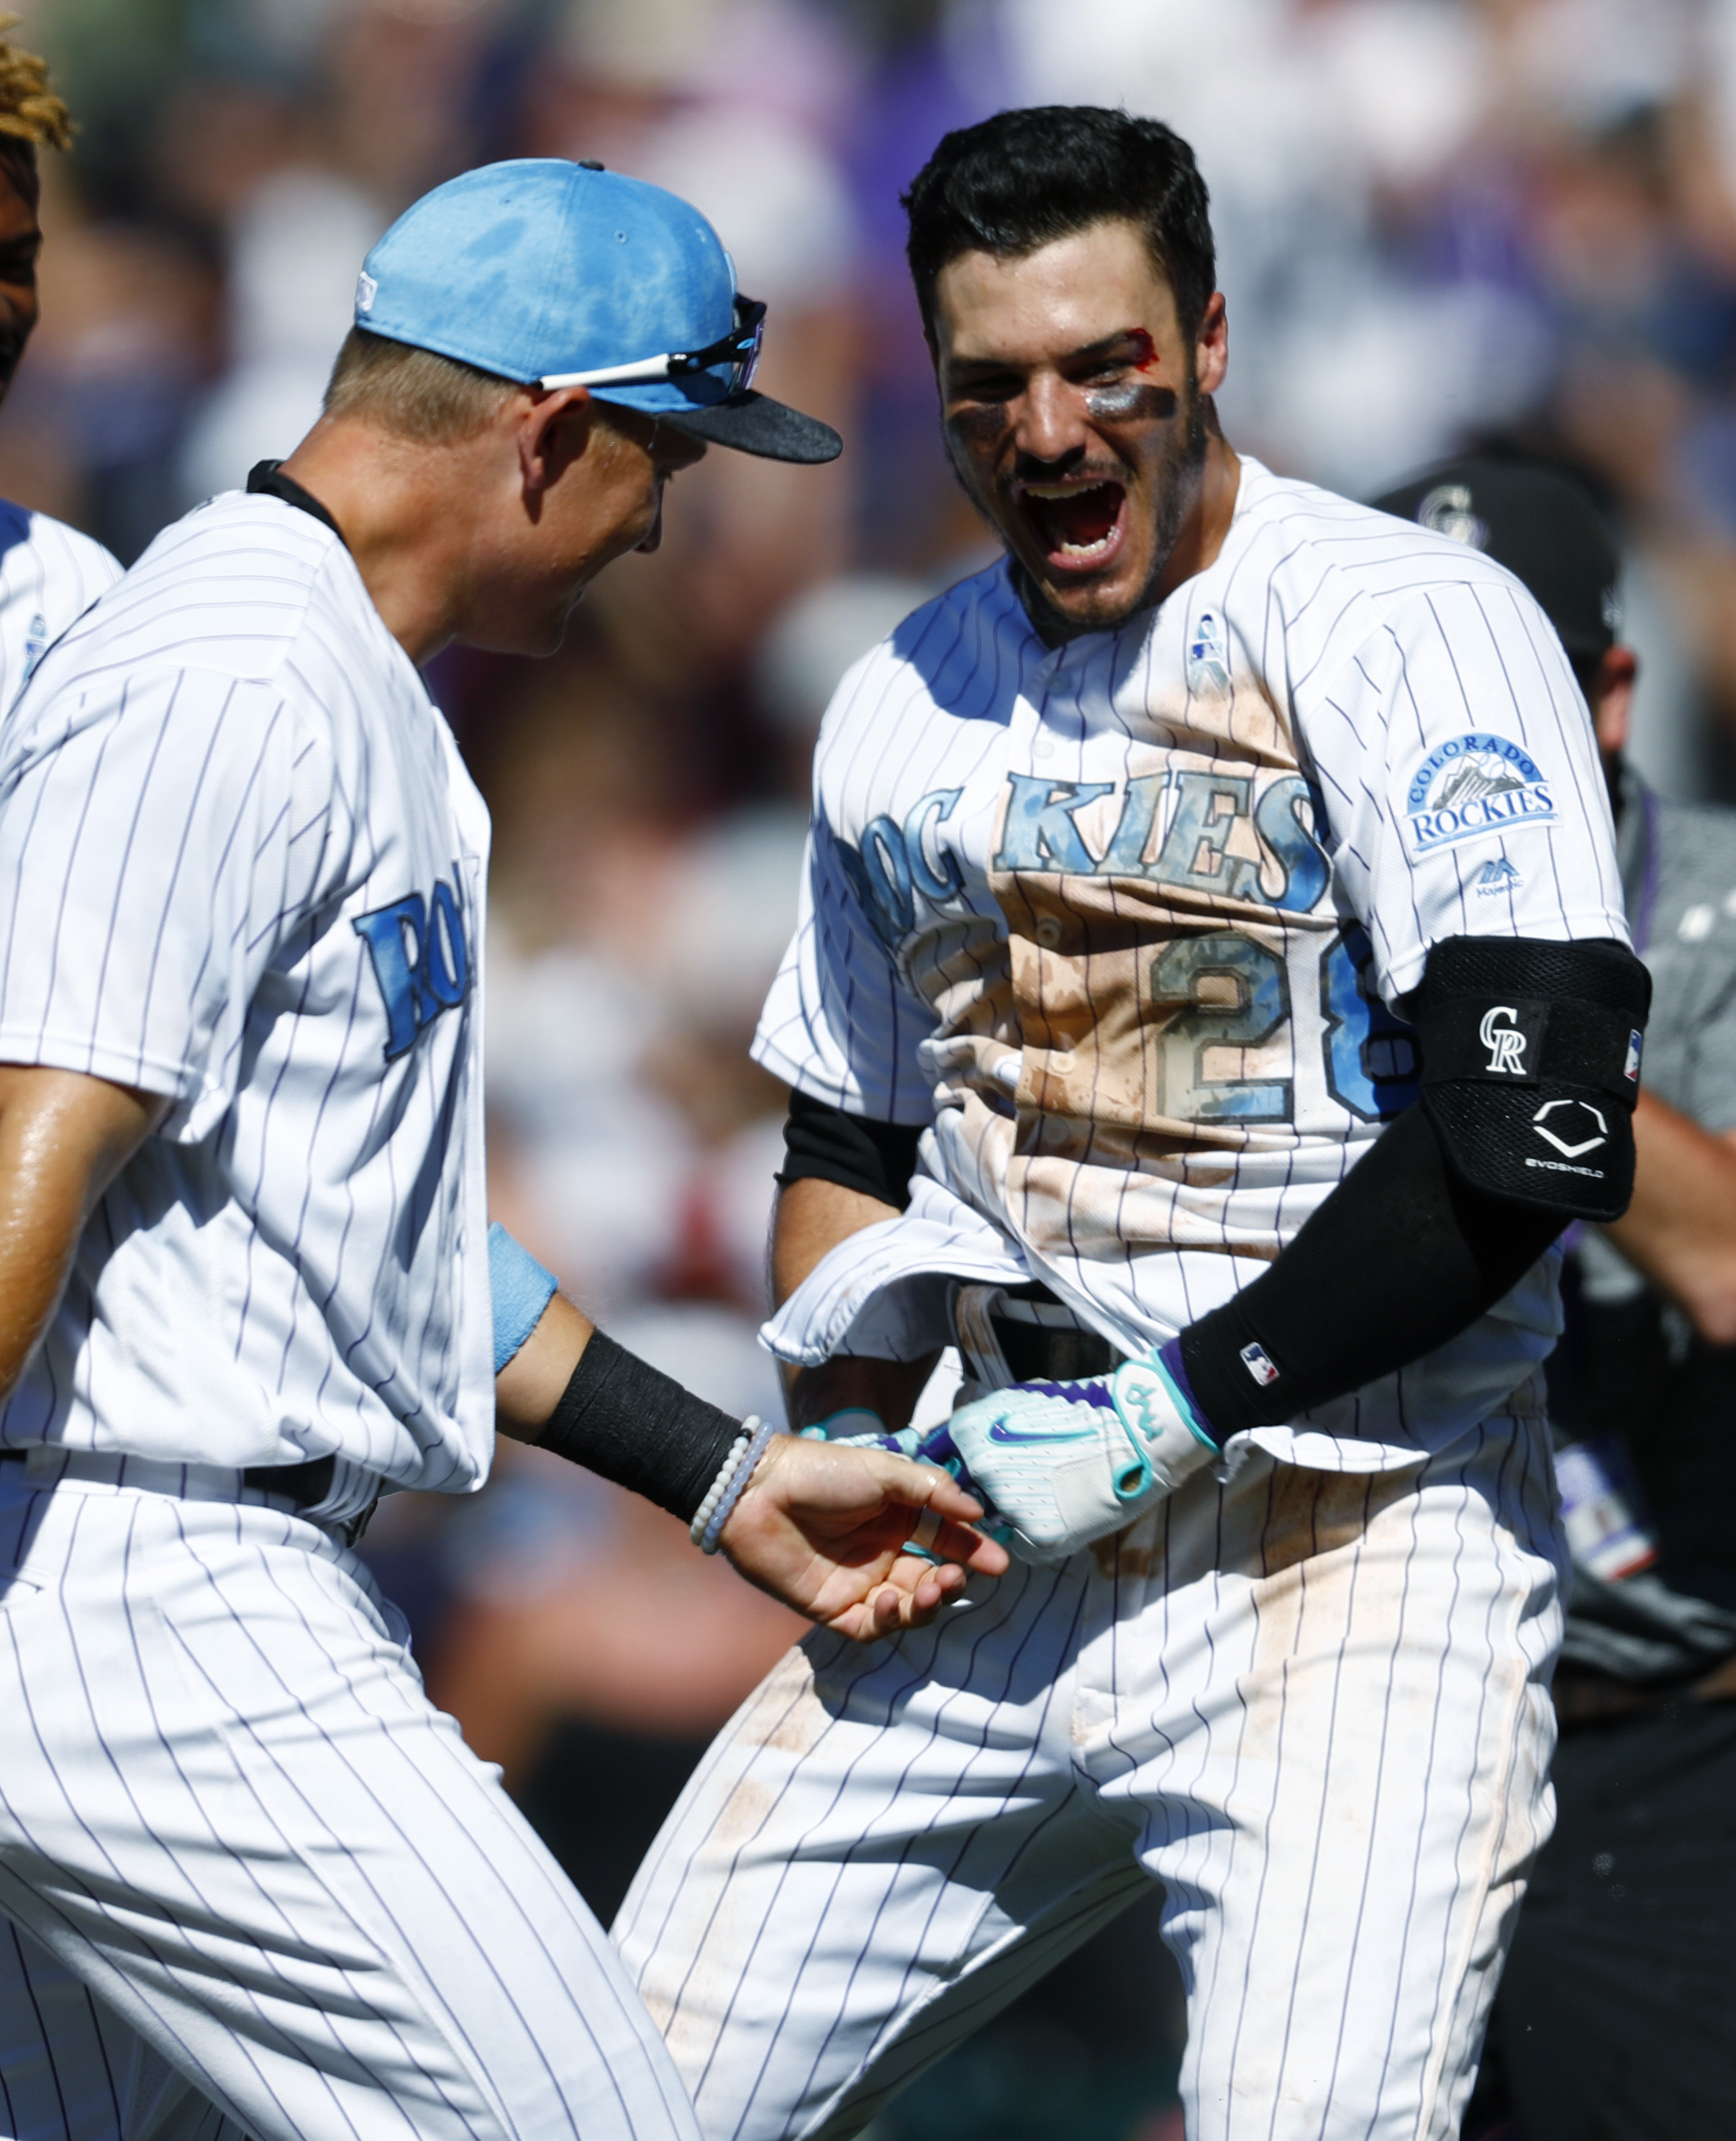 The Rockies basically beat up Nolan Arenado in a bloody walk-off cycle  celebration